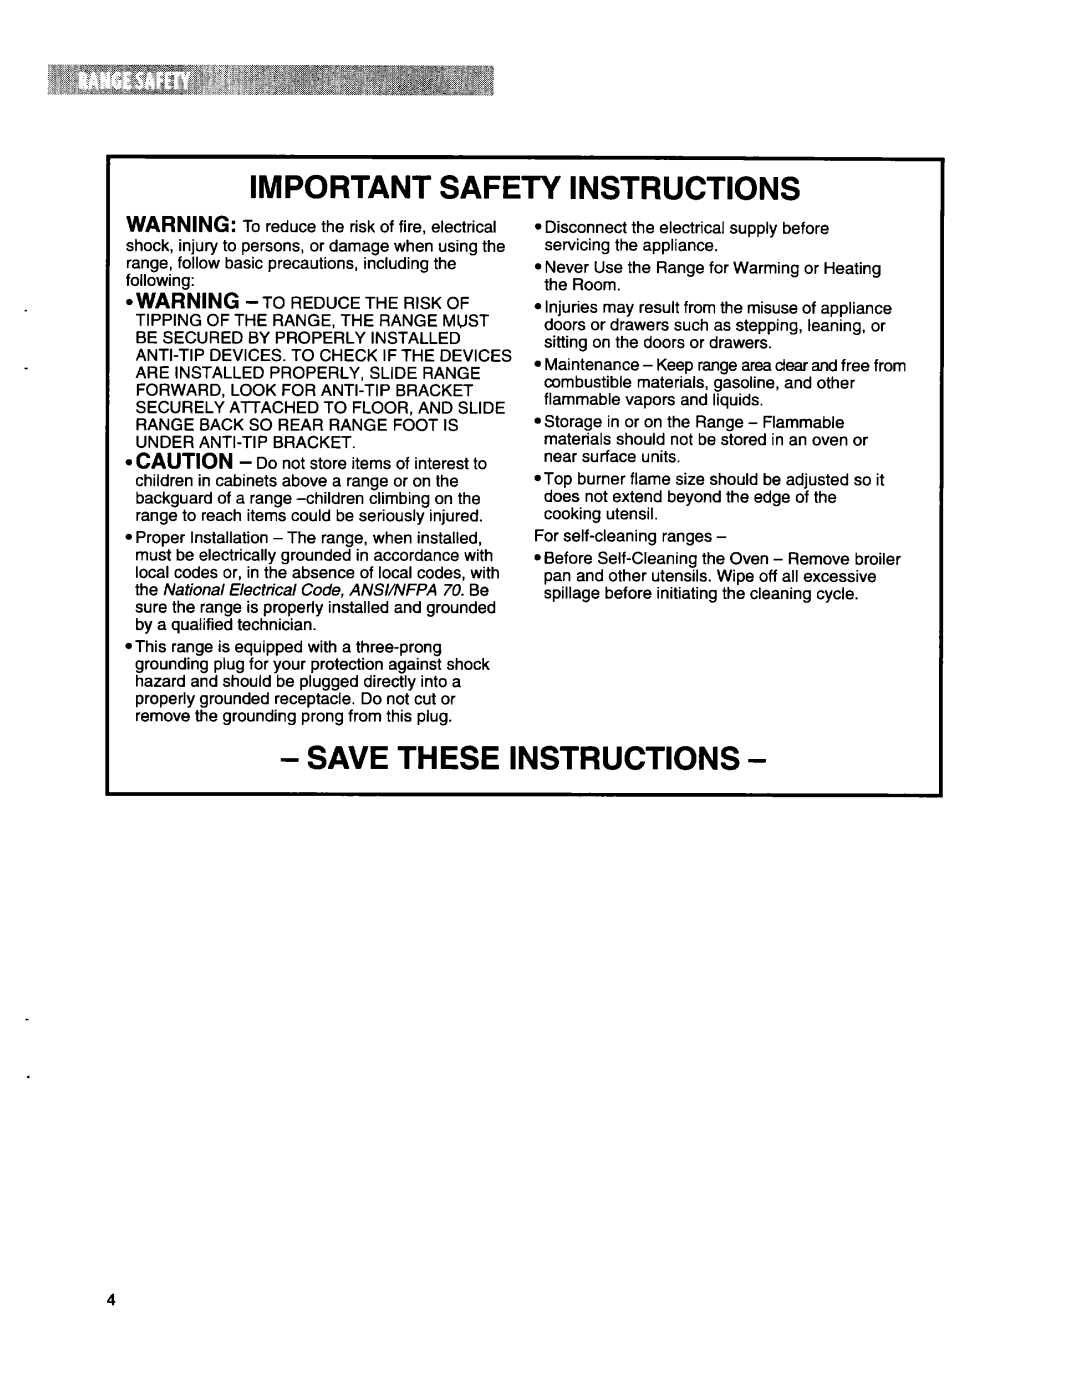 Whirlpool SF31OBEG warranty Important Safety Instructions, Save These Instructions 